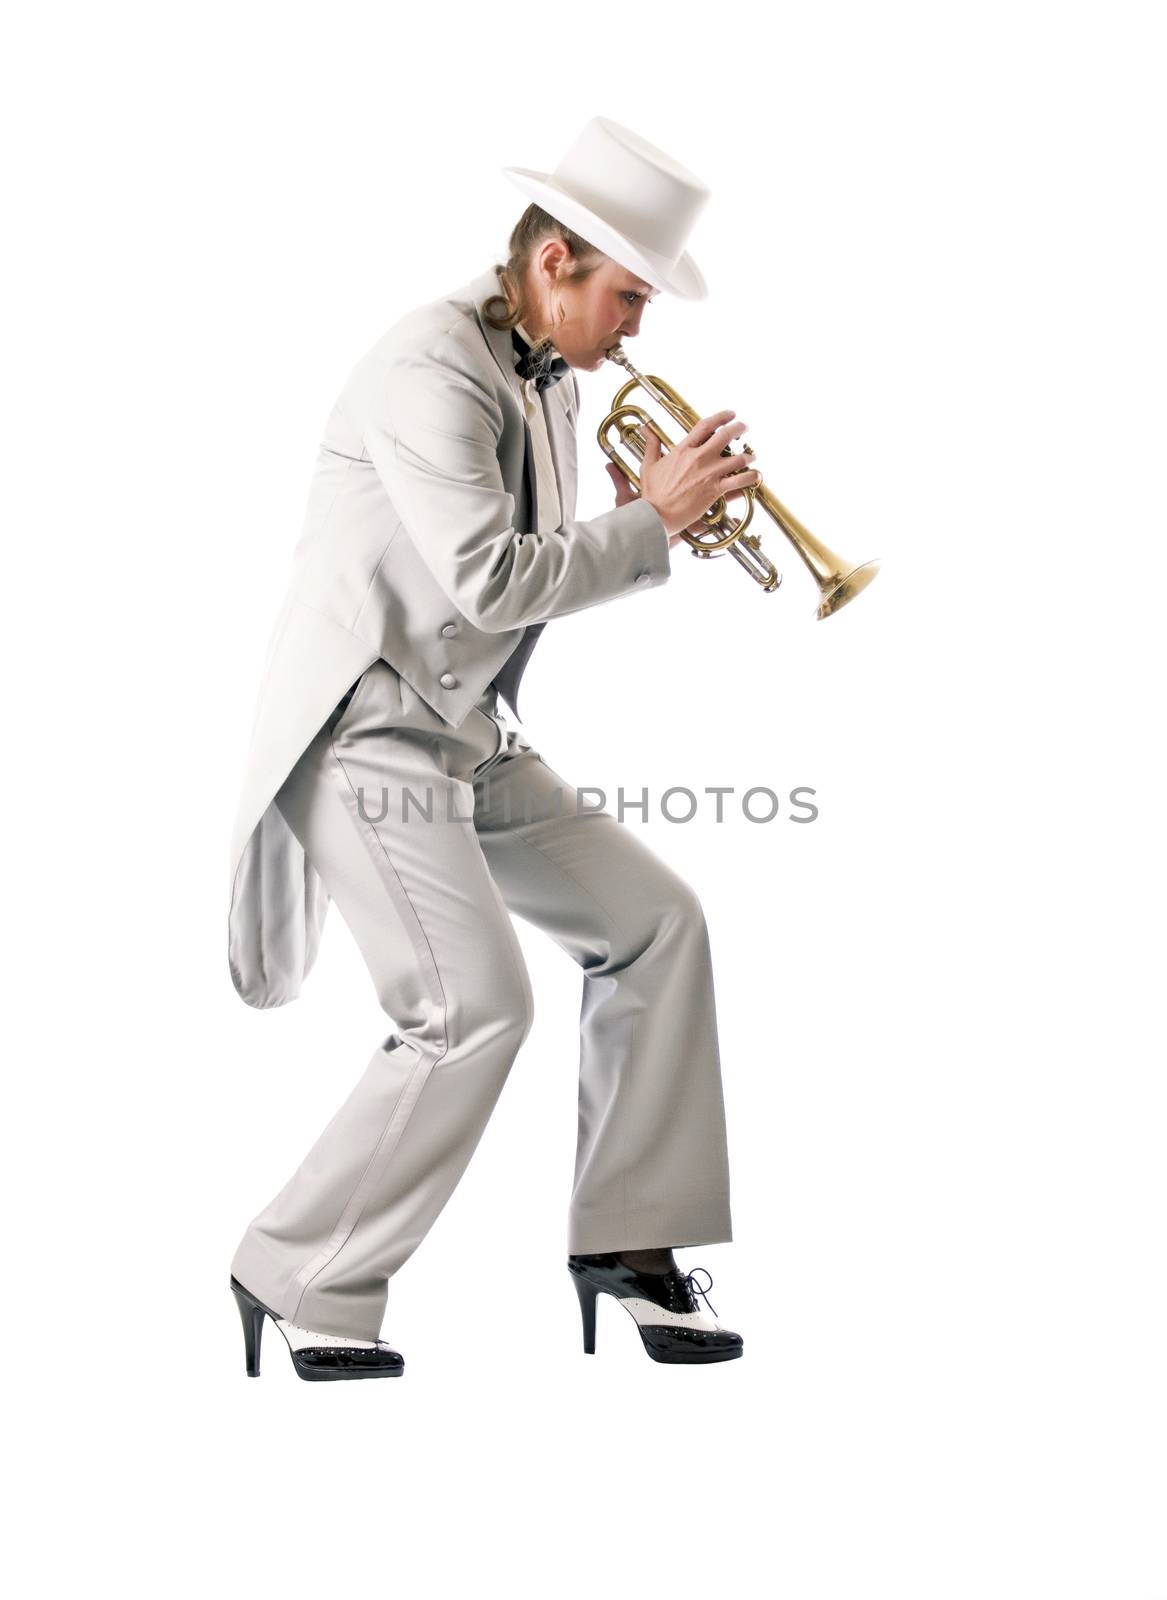 Pretty woman in tuxedo and top hat playing blues on a trumpet